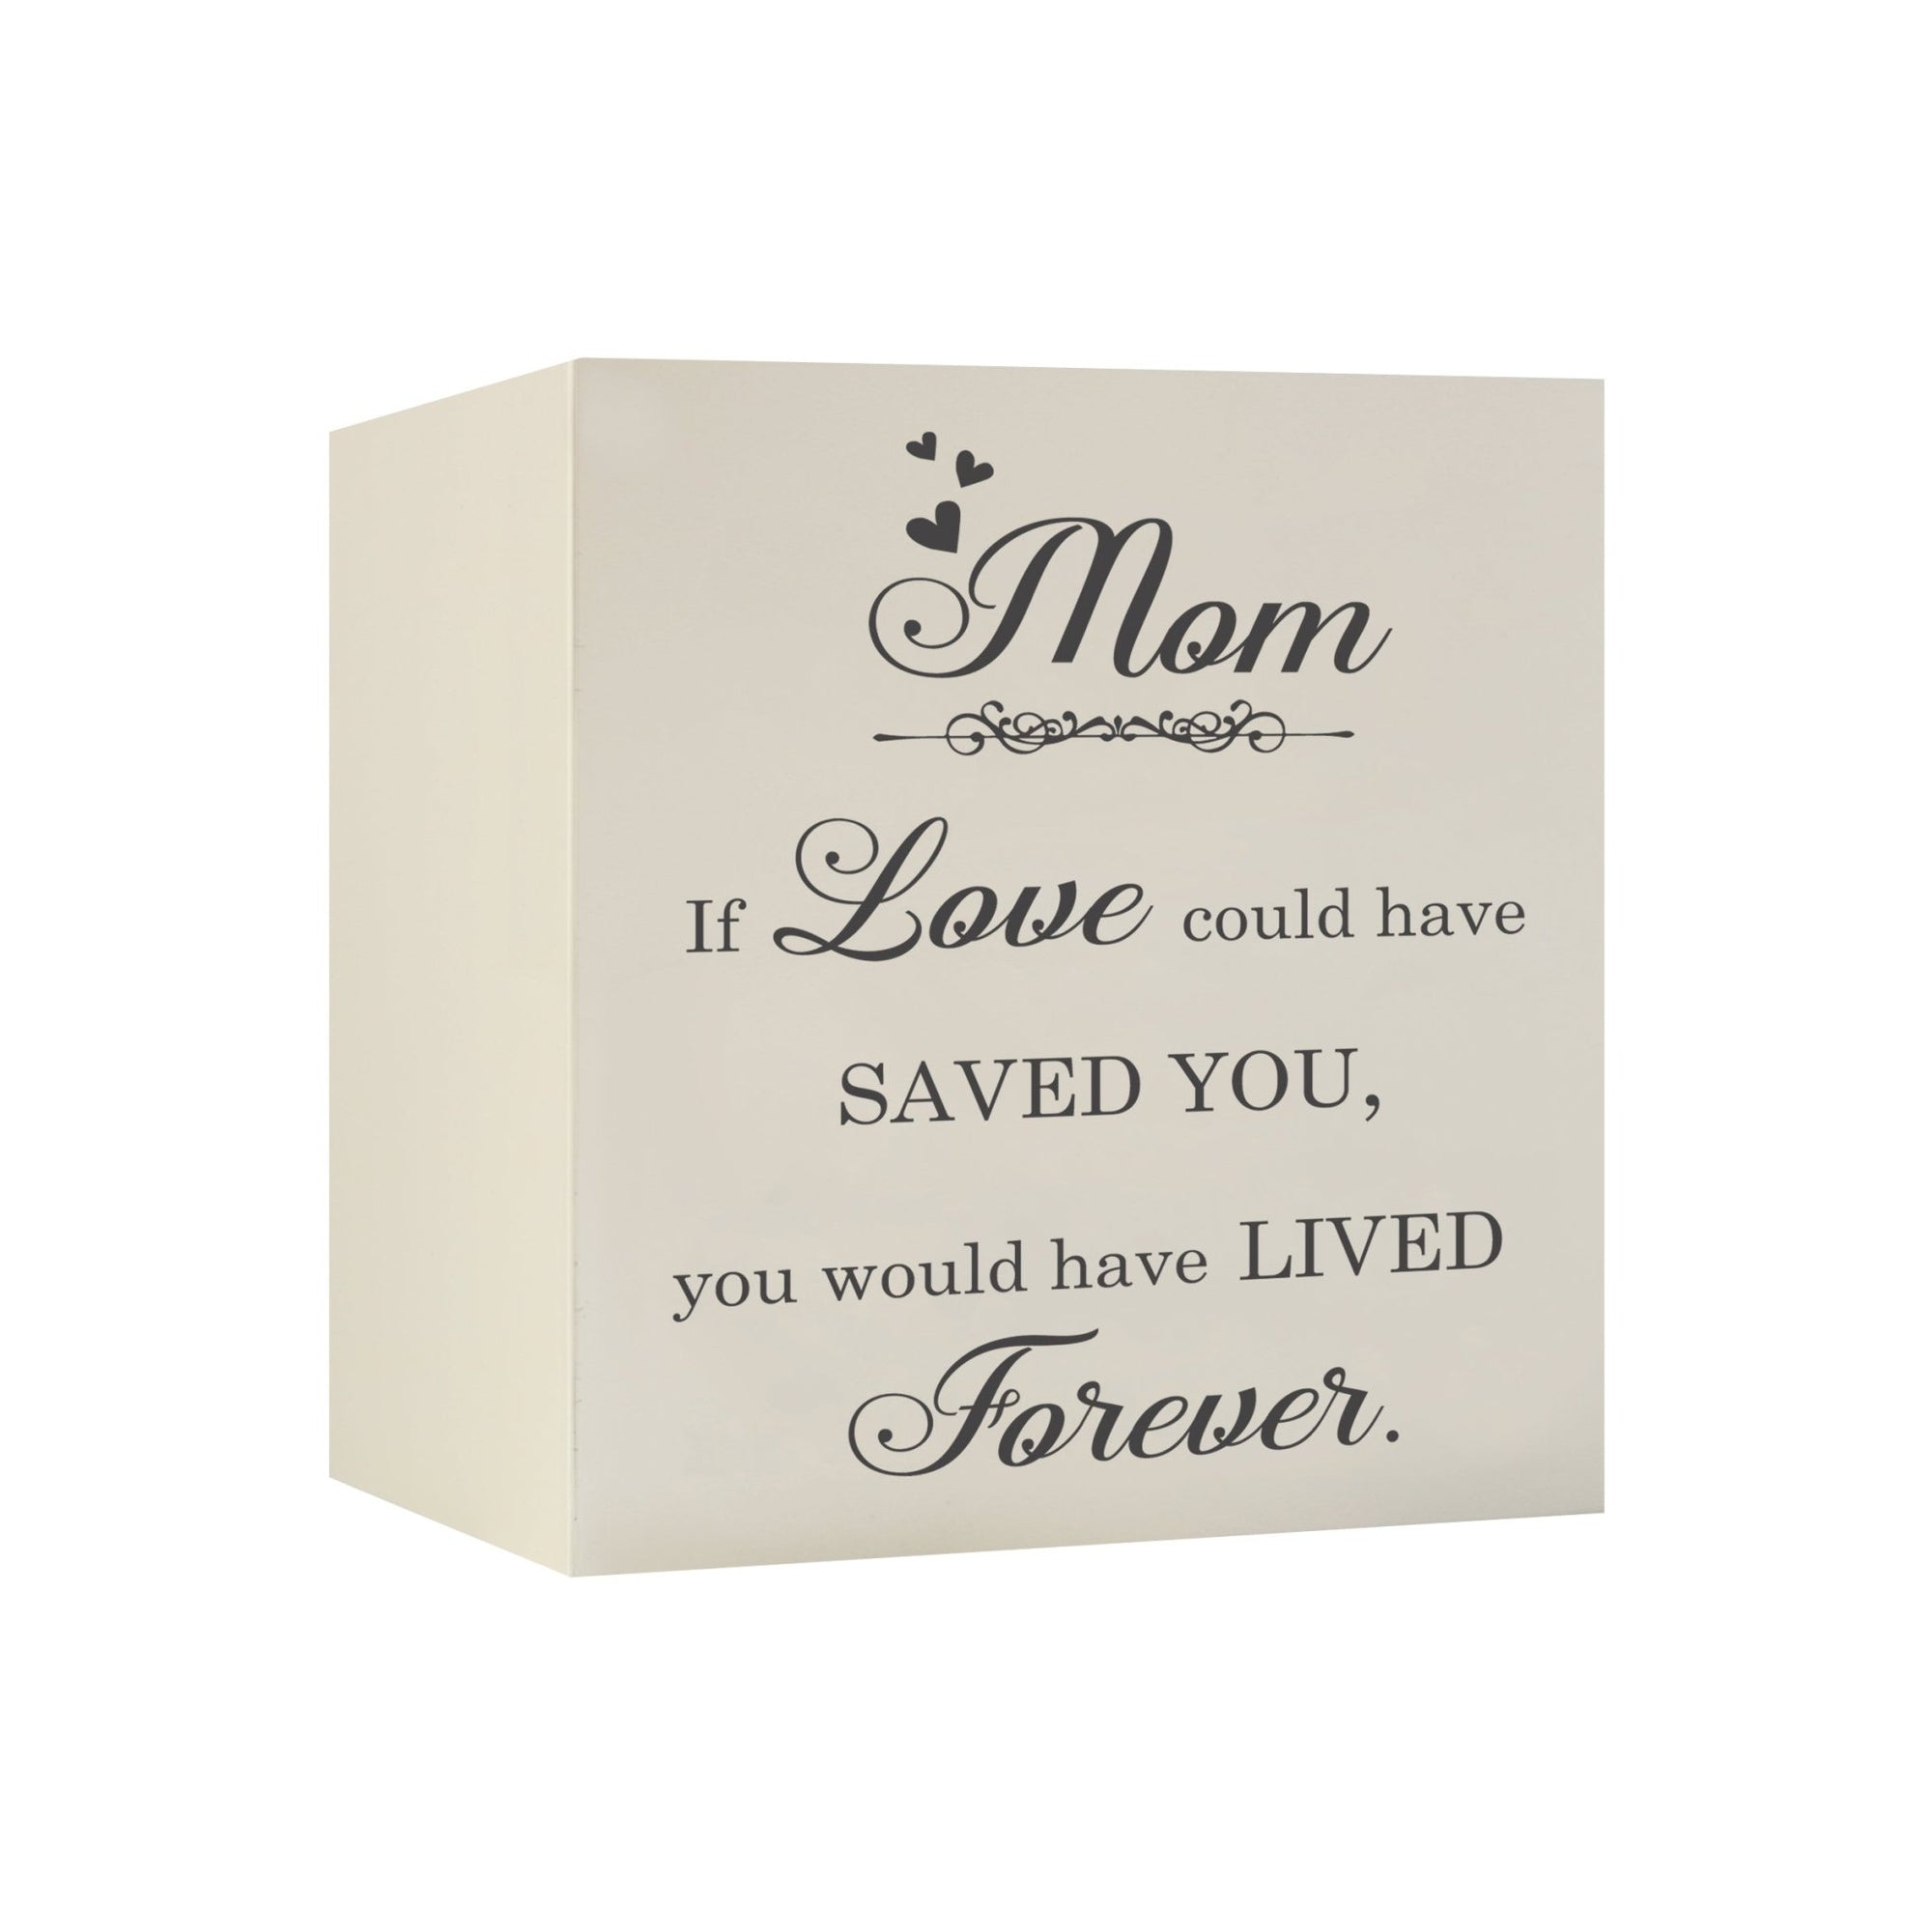 Memorial Bereavement Keepsake Cremation Shadow Box and Urn 6x6in Holds 53 Cu Inches Of Human Ashes Mom, If Love Could - LifeSong Milestones